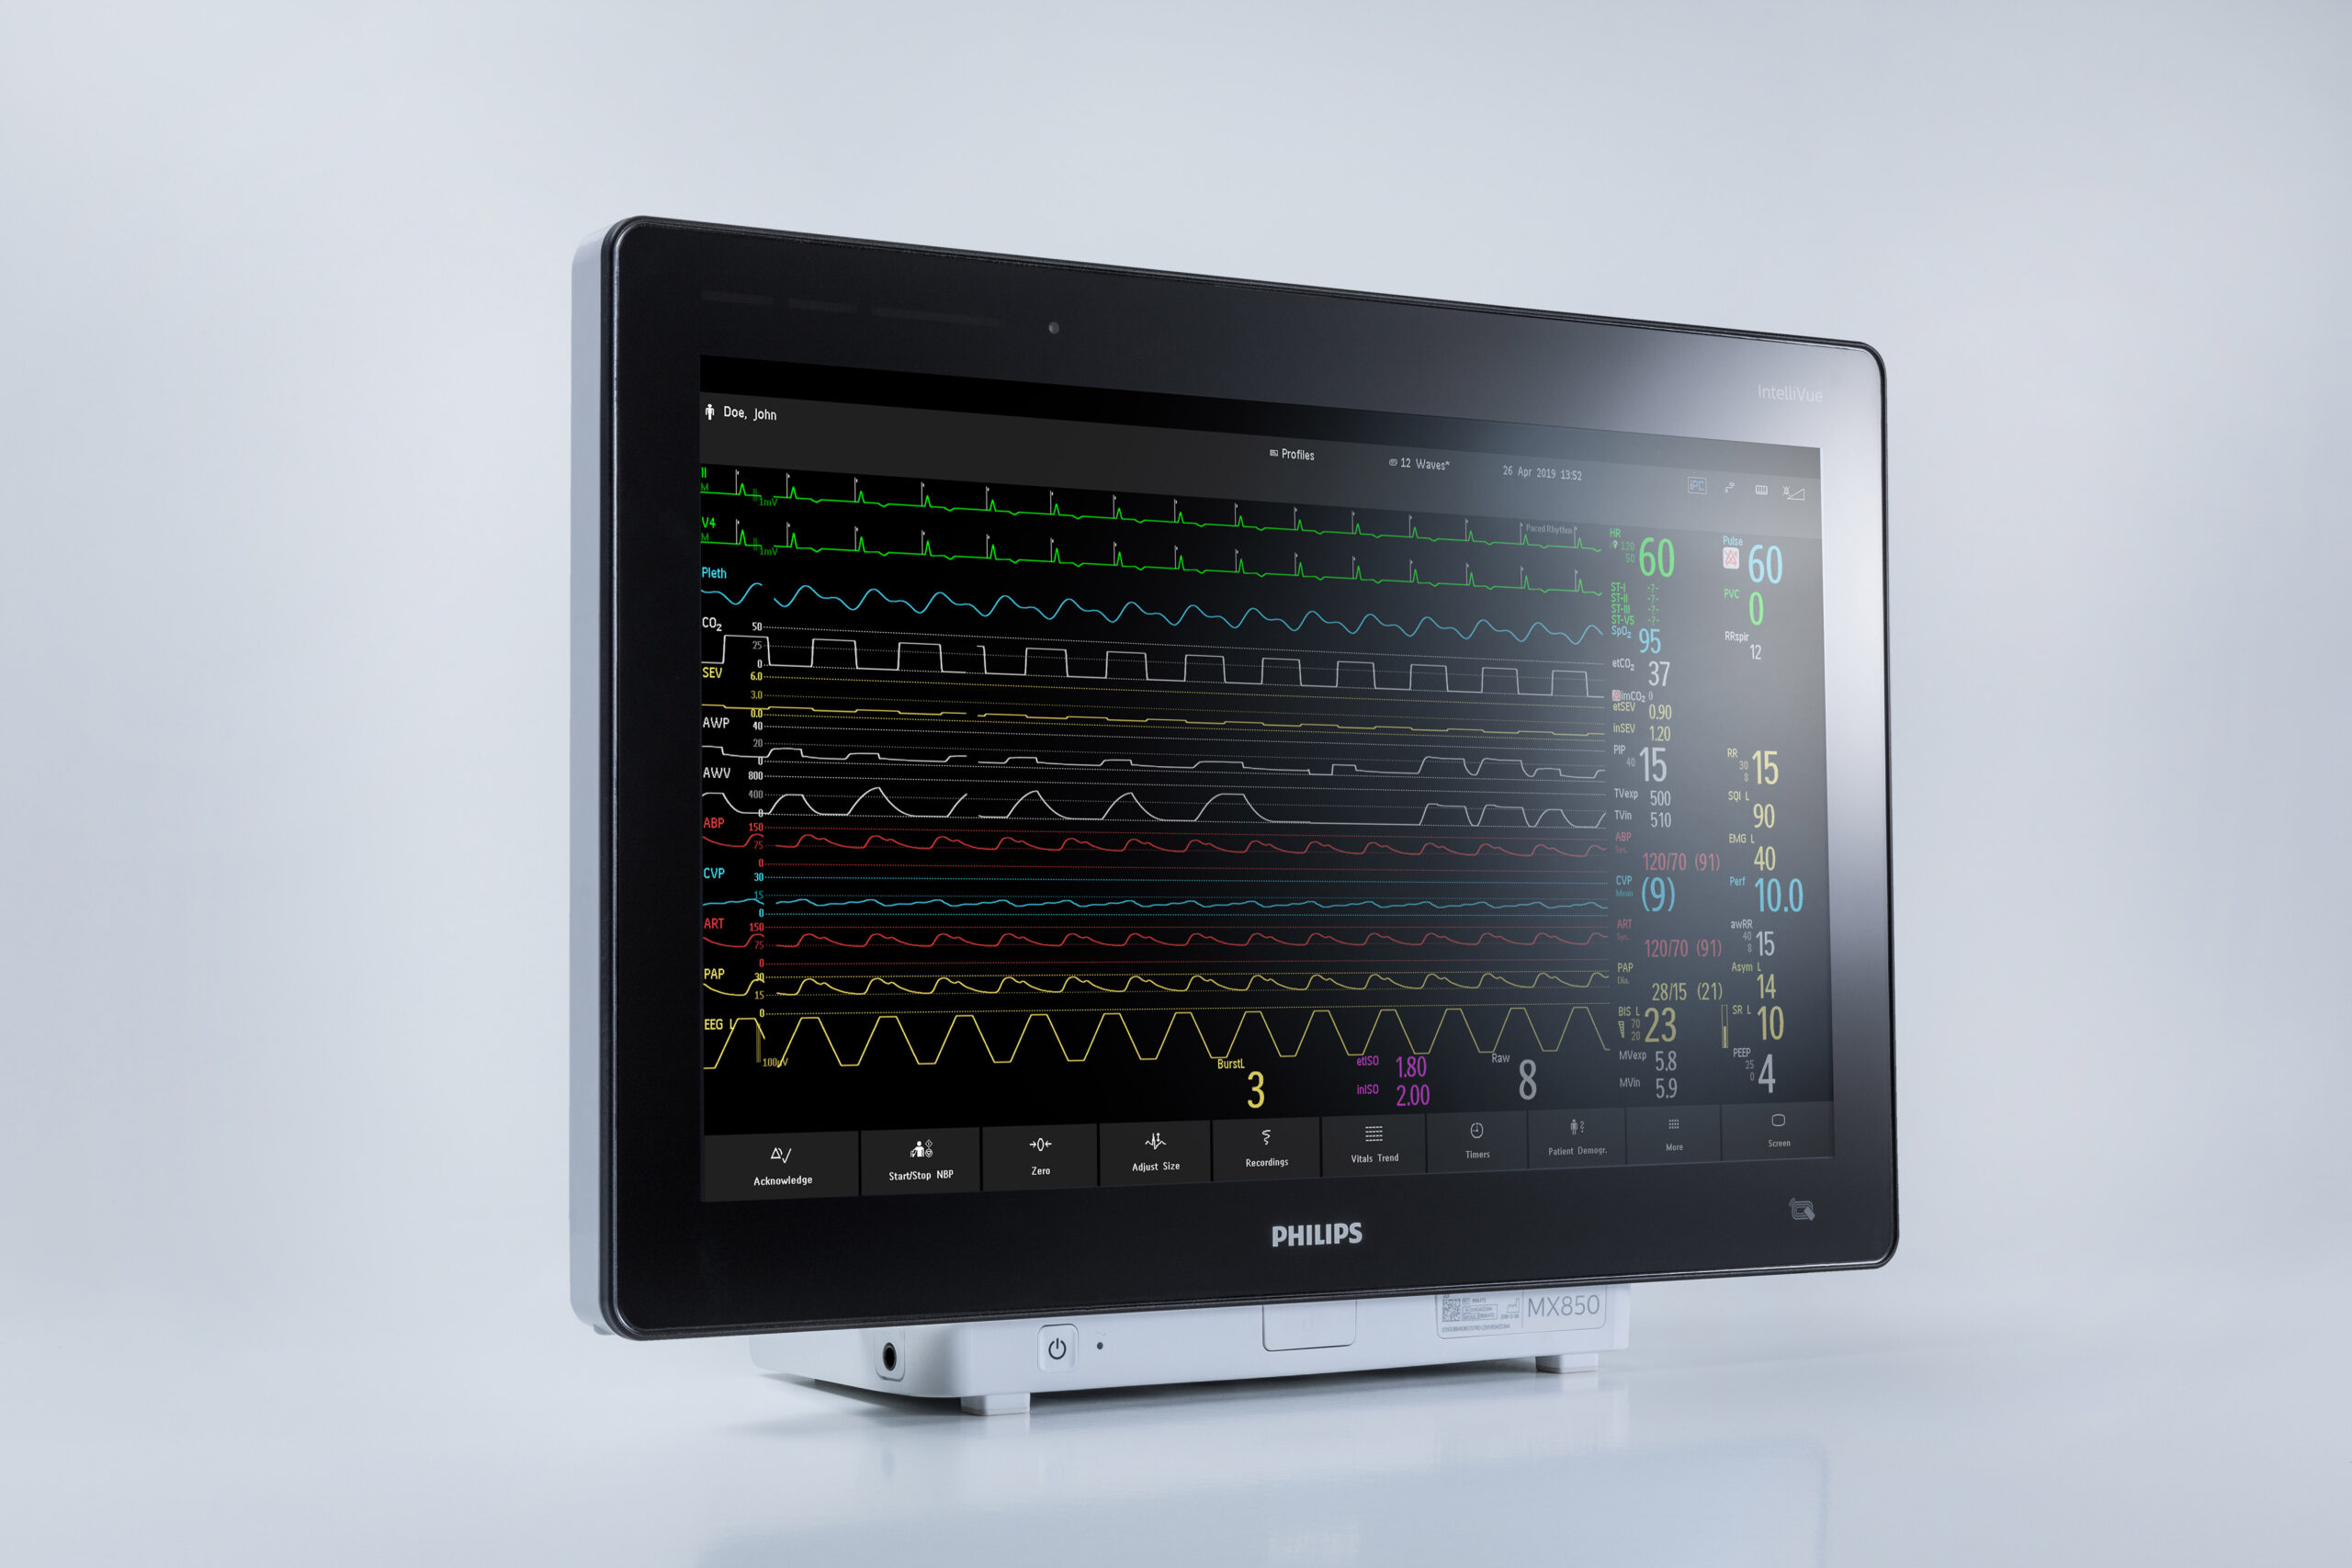 Image of the IntelliVue 850 monitor shows a large sceen with several patient vitals displayed in different colors. 